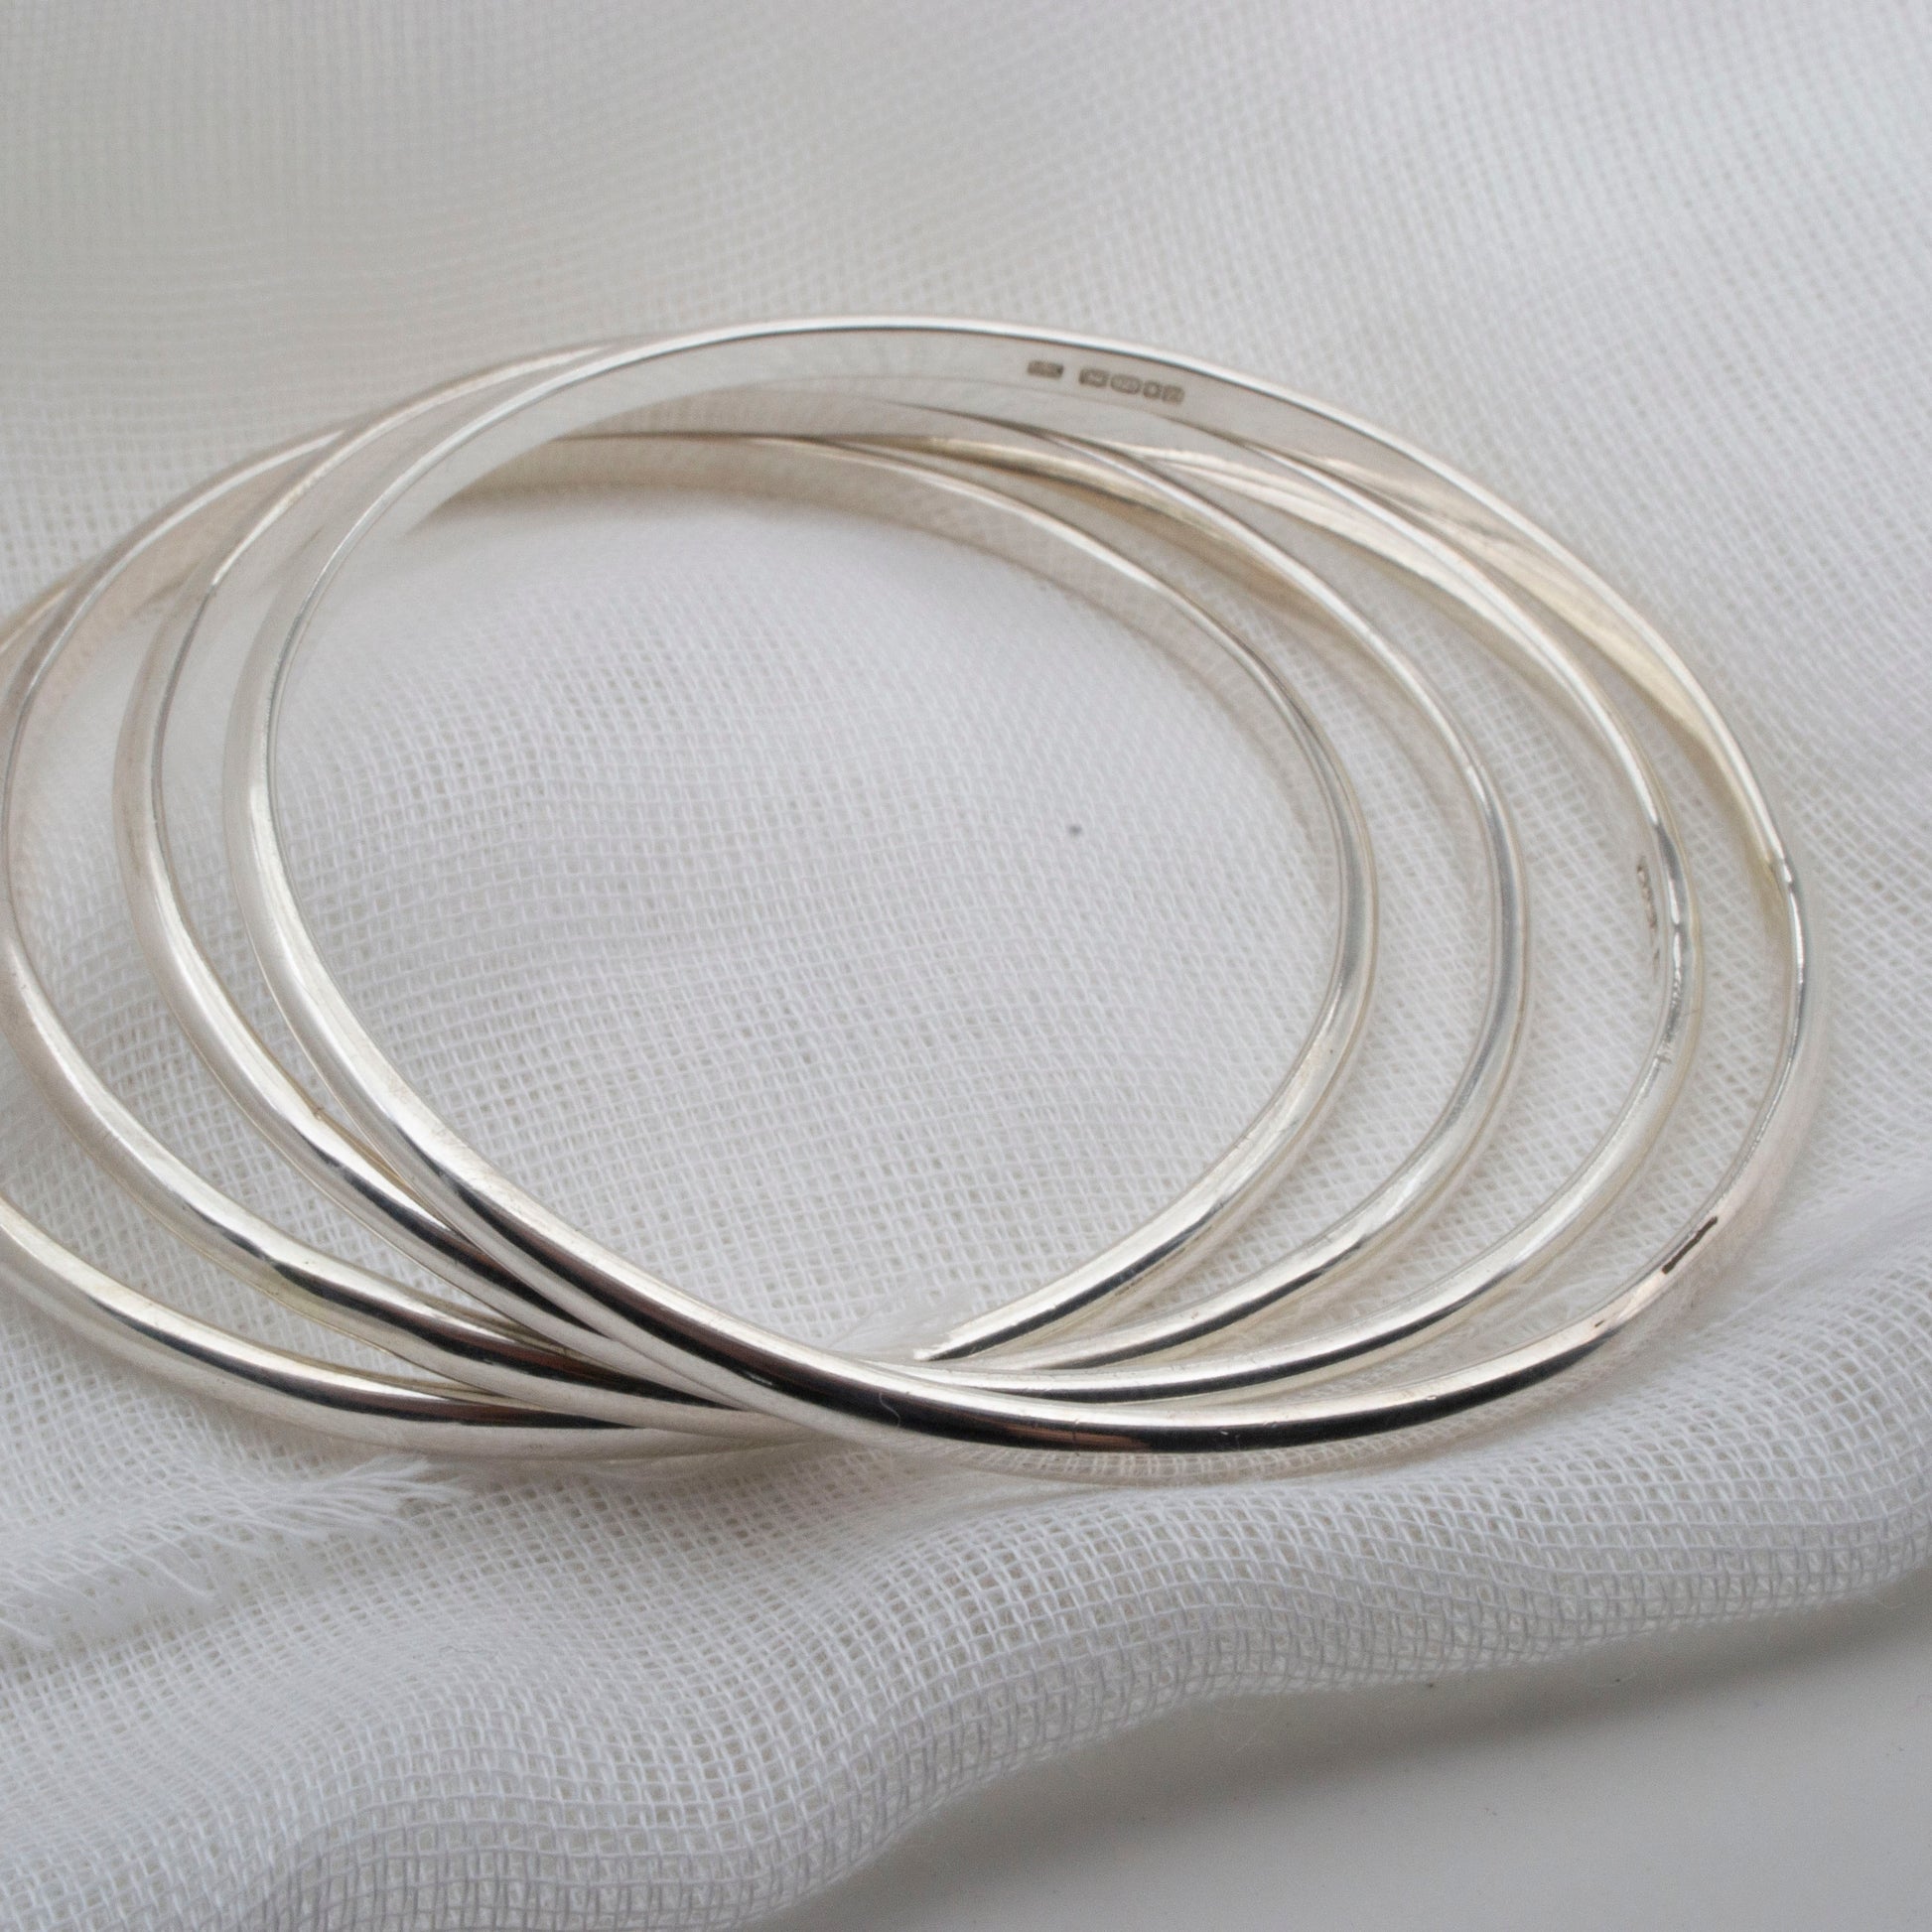 simpler sterling silver bangles in a pile